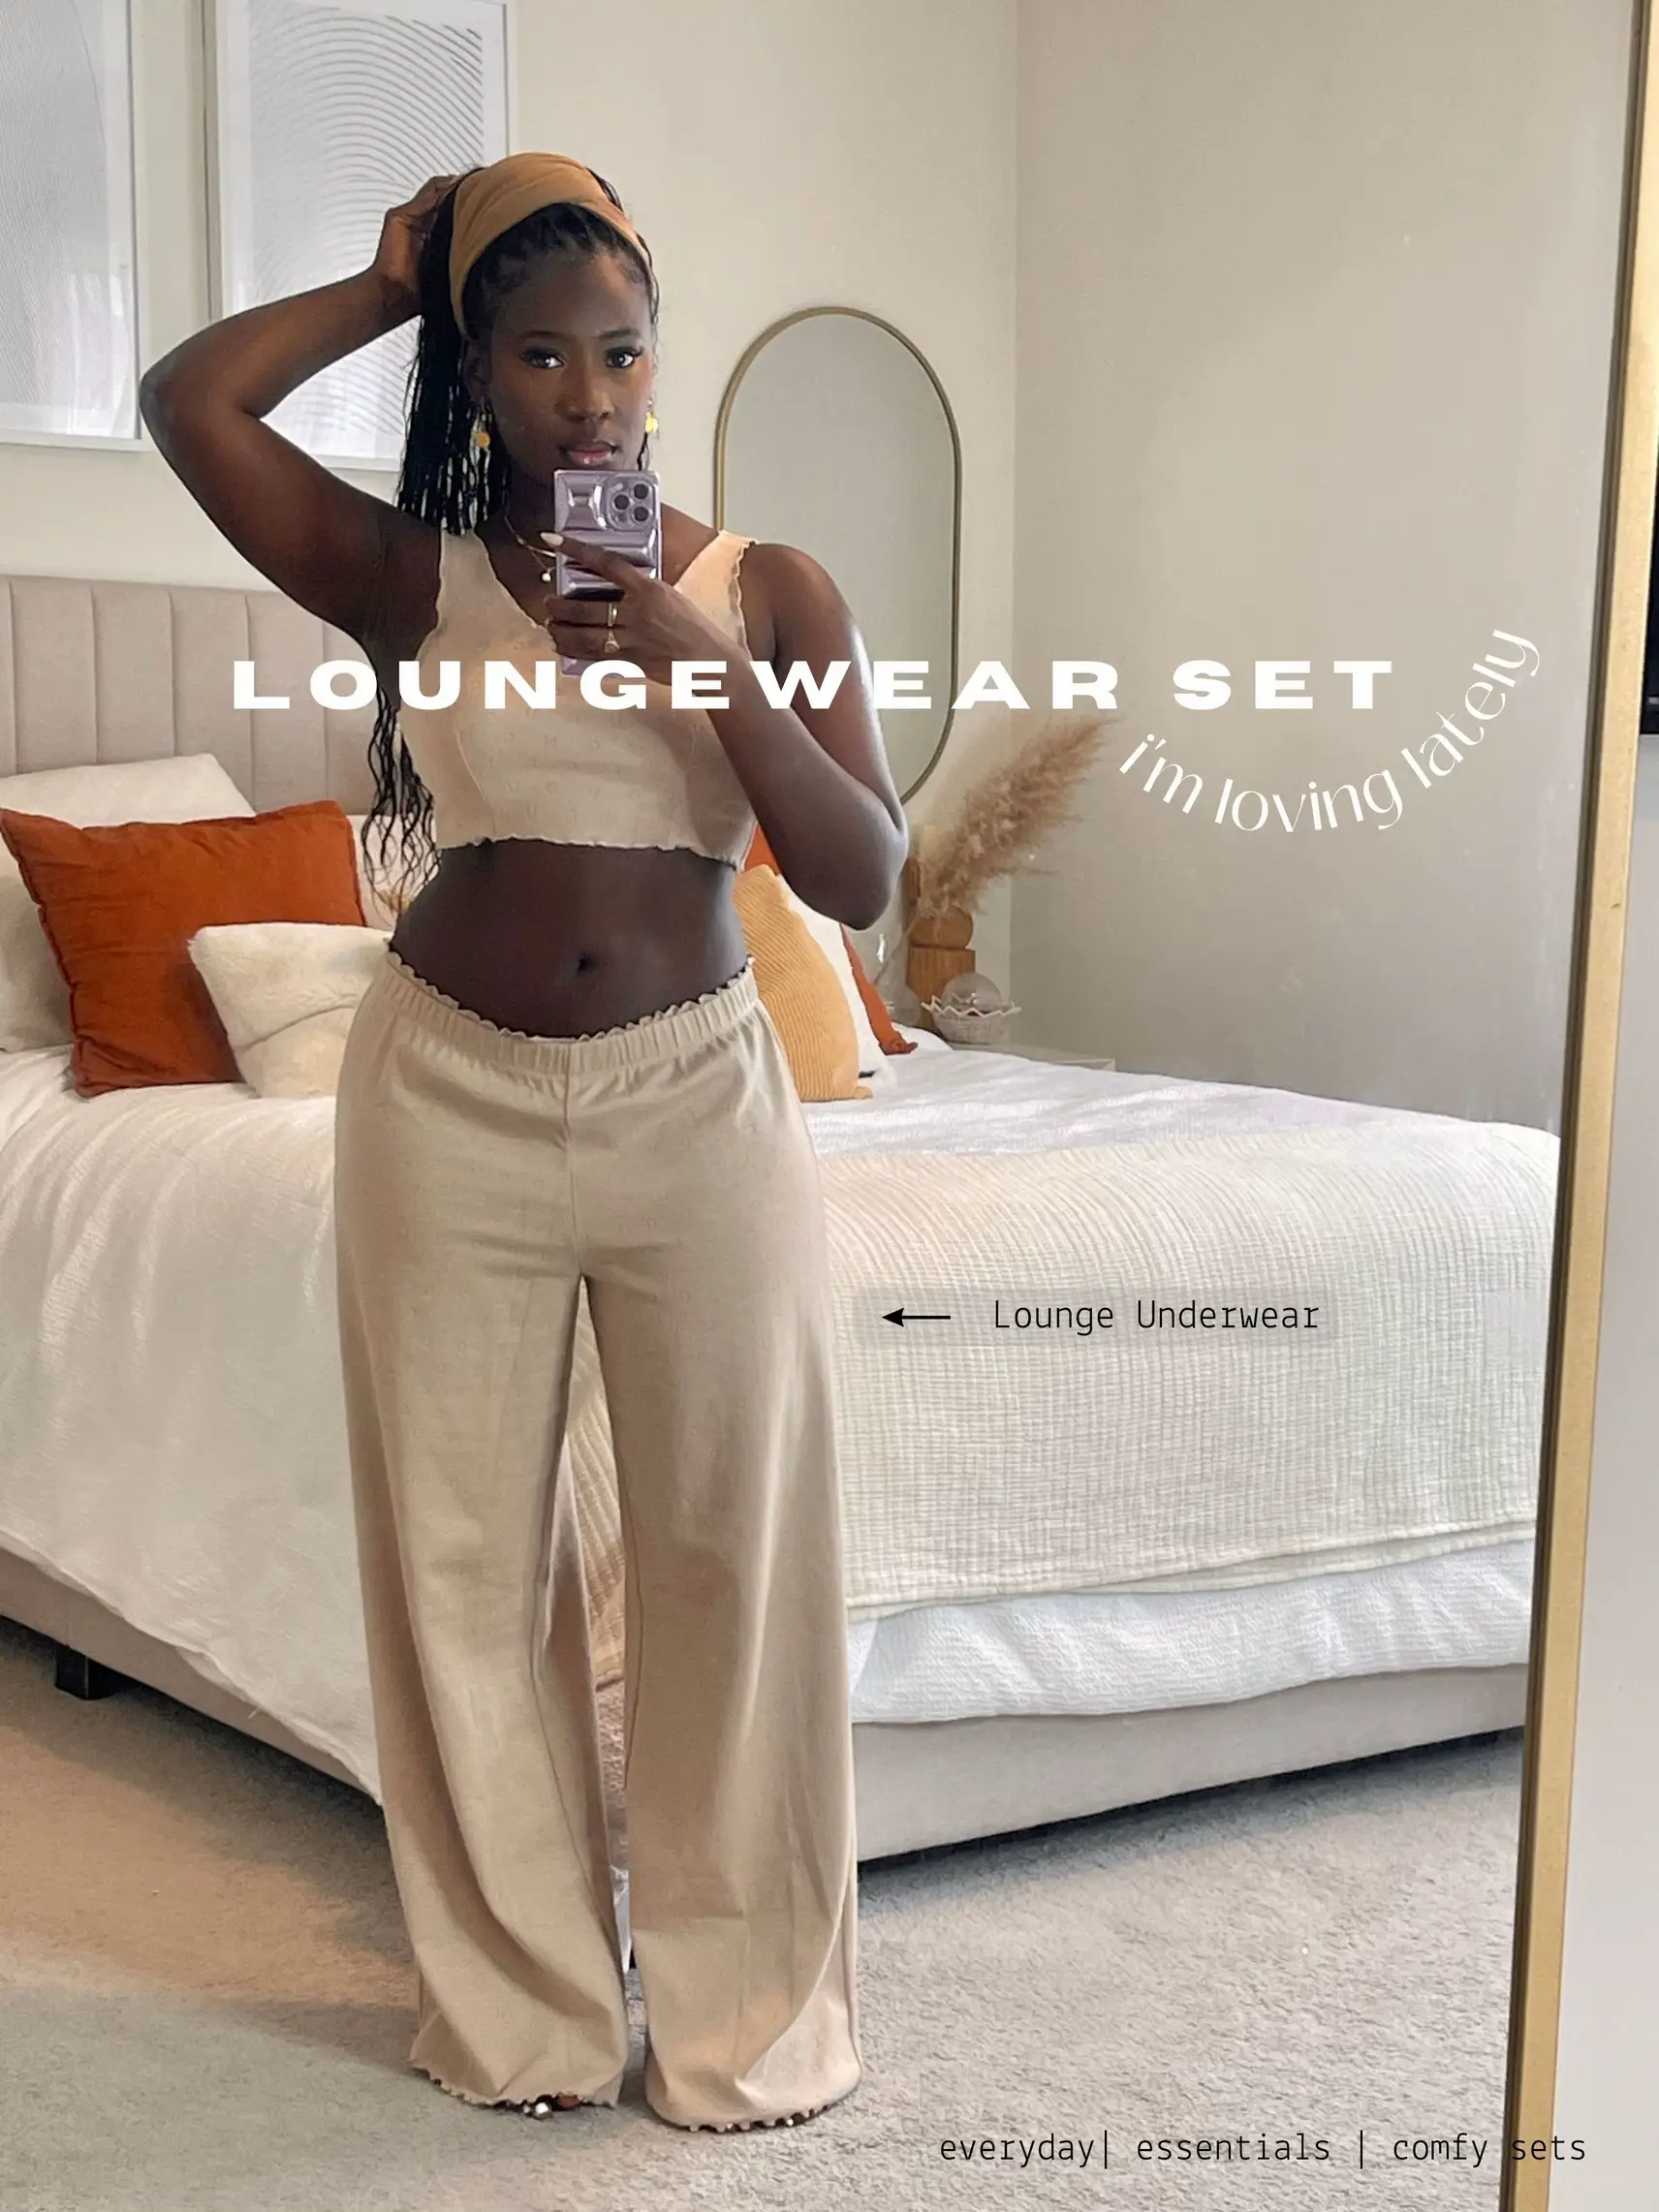 Timeless Intimates & Loungewear w/ Luvlette.